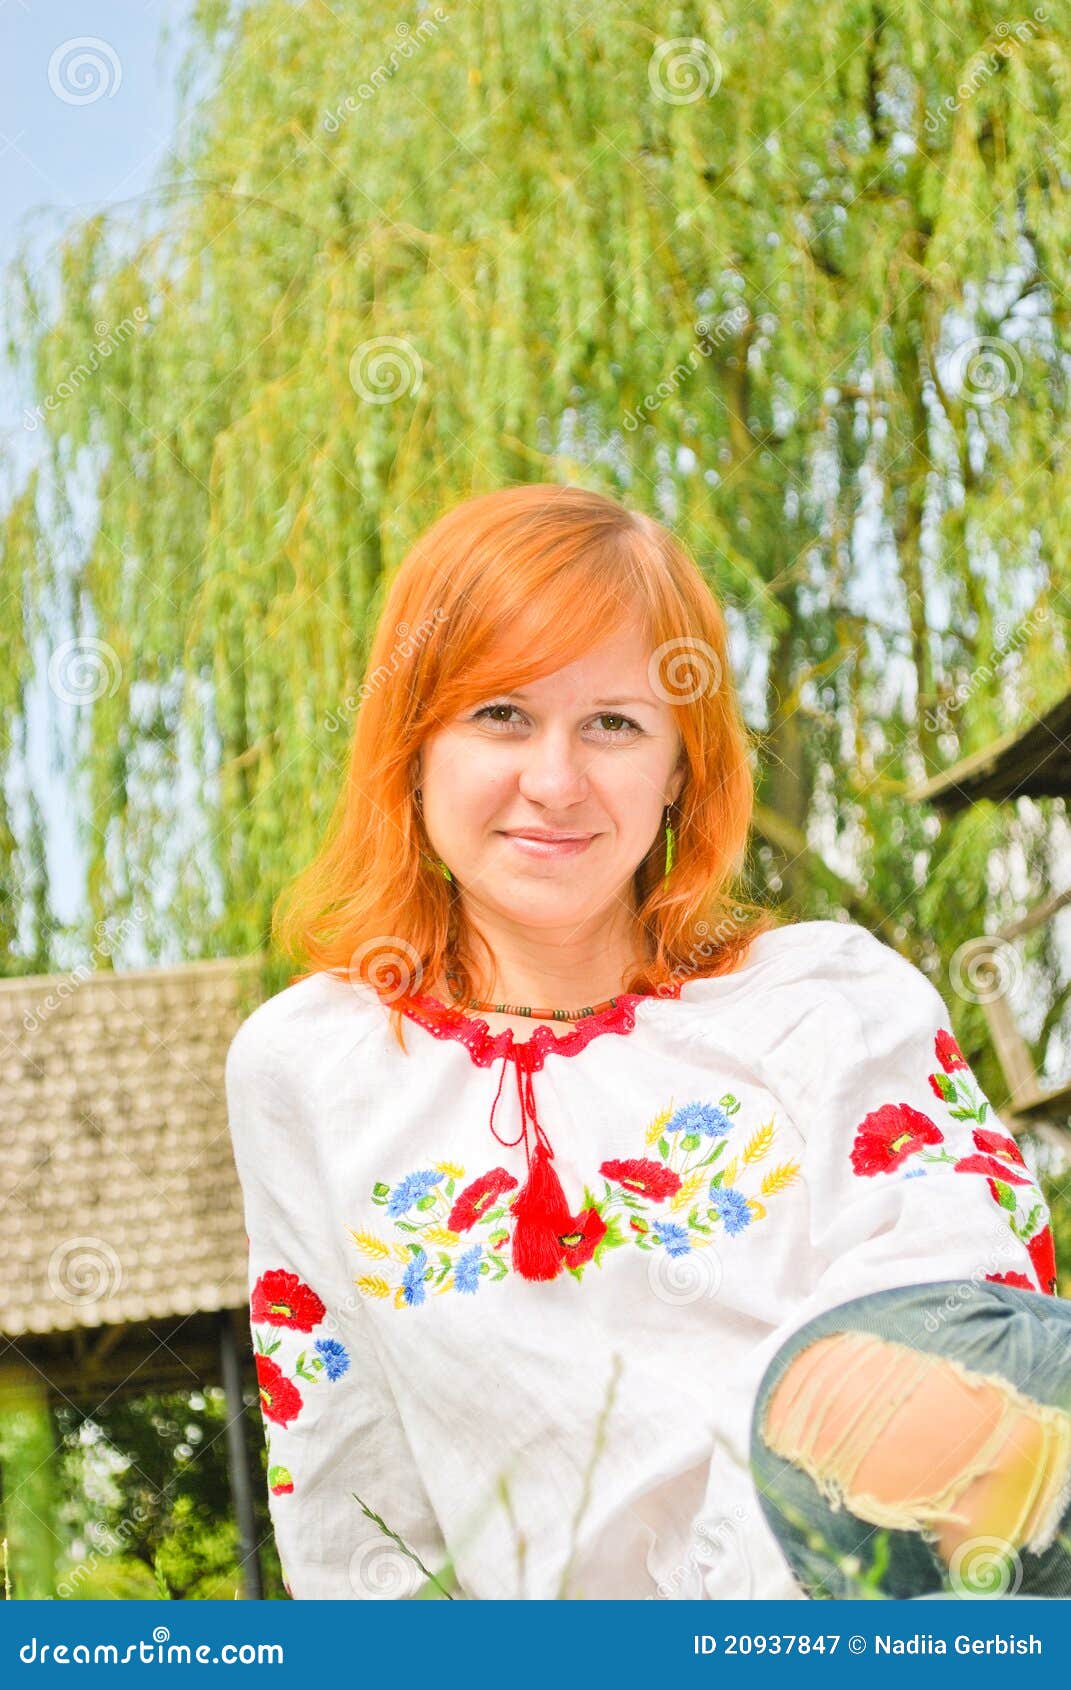 Ukrainian Girl in National Clothes Stock Image - Image of carefree ...